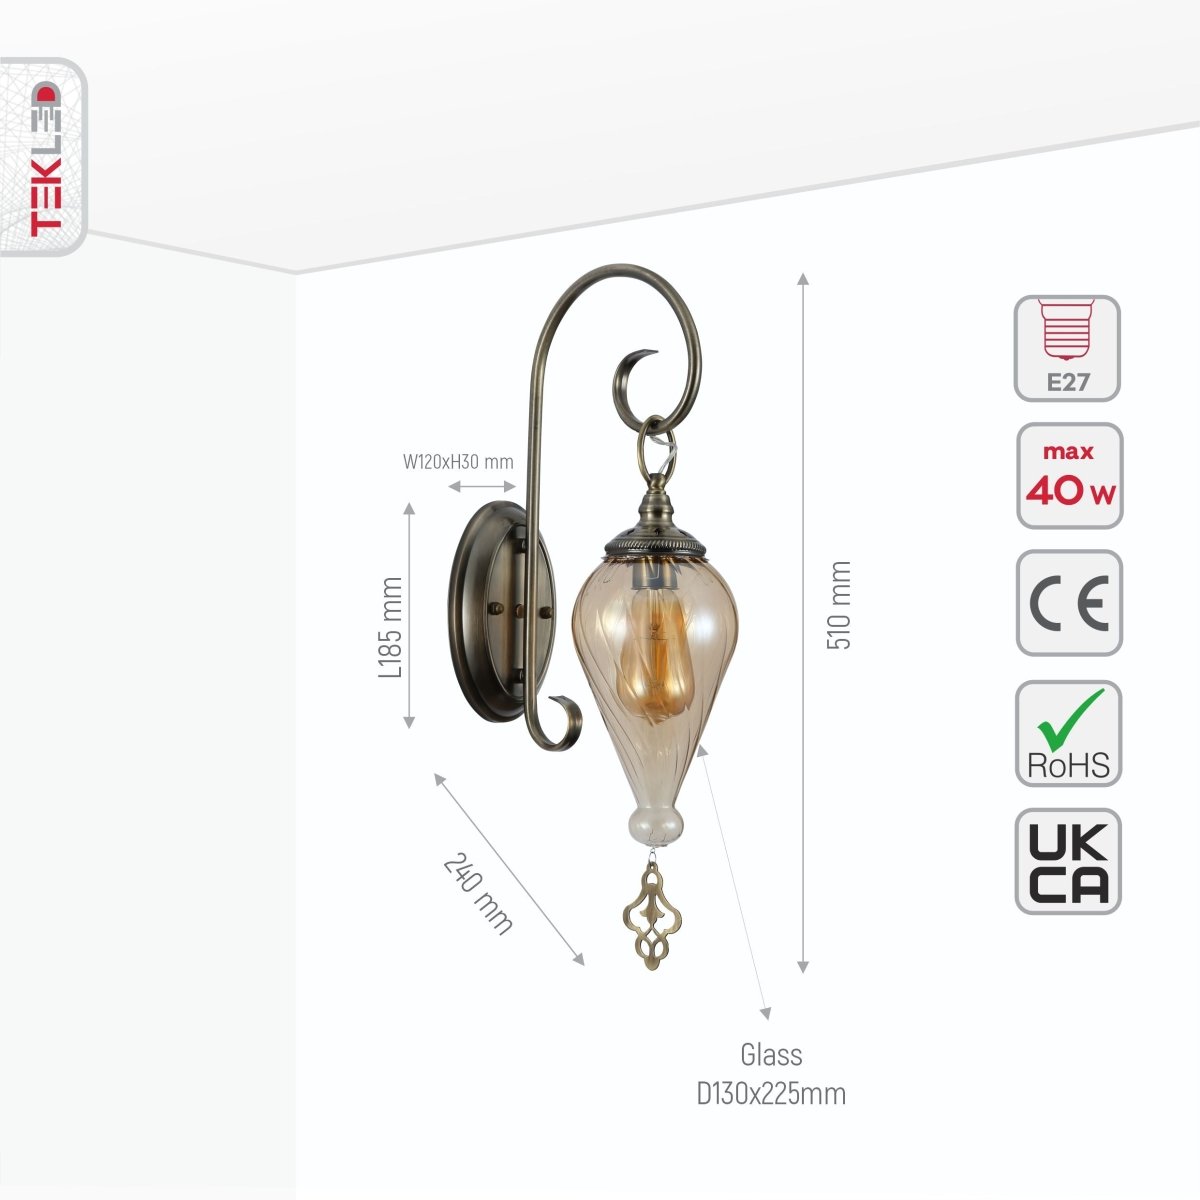 Size and specs of Amber Glass Antique Bronze Metal Body Moroccan Style Wall Light with E27 Fitting | TEKLED 151-19452